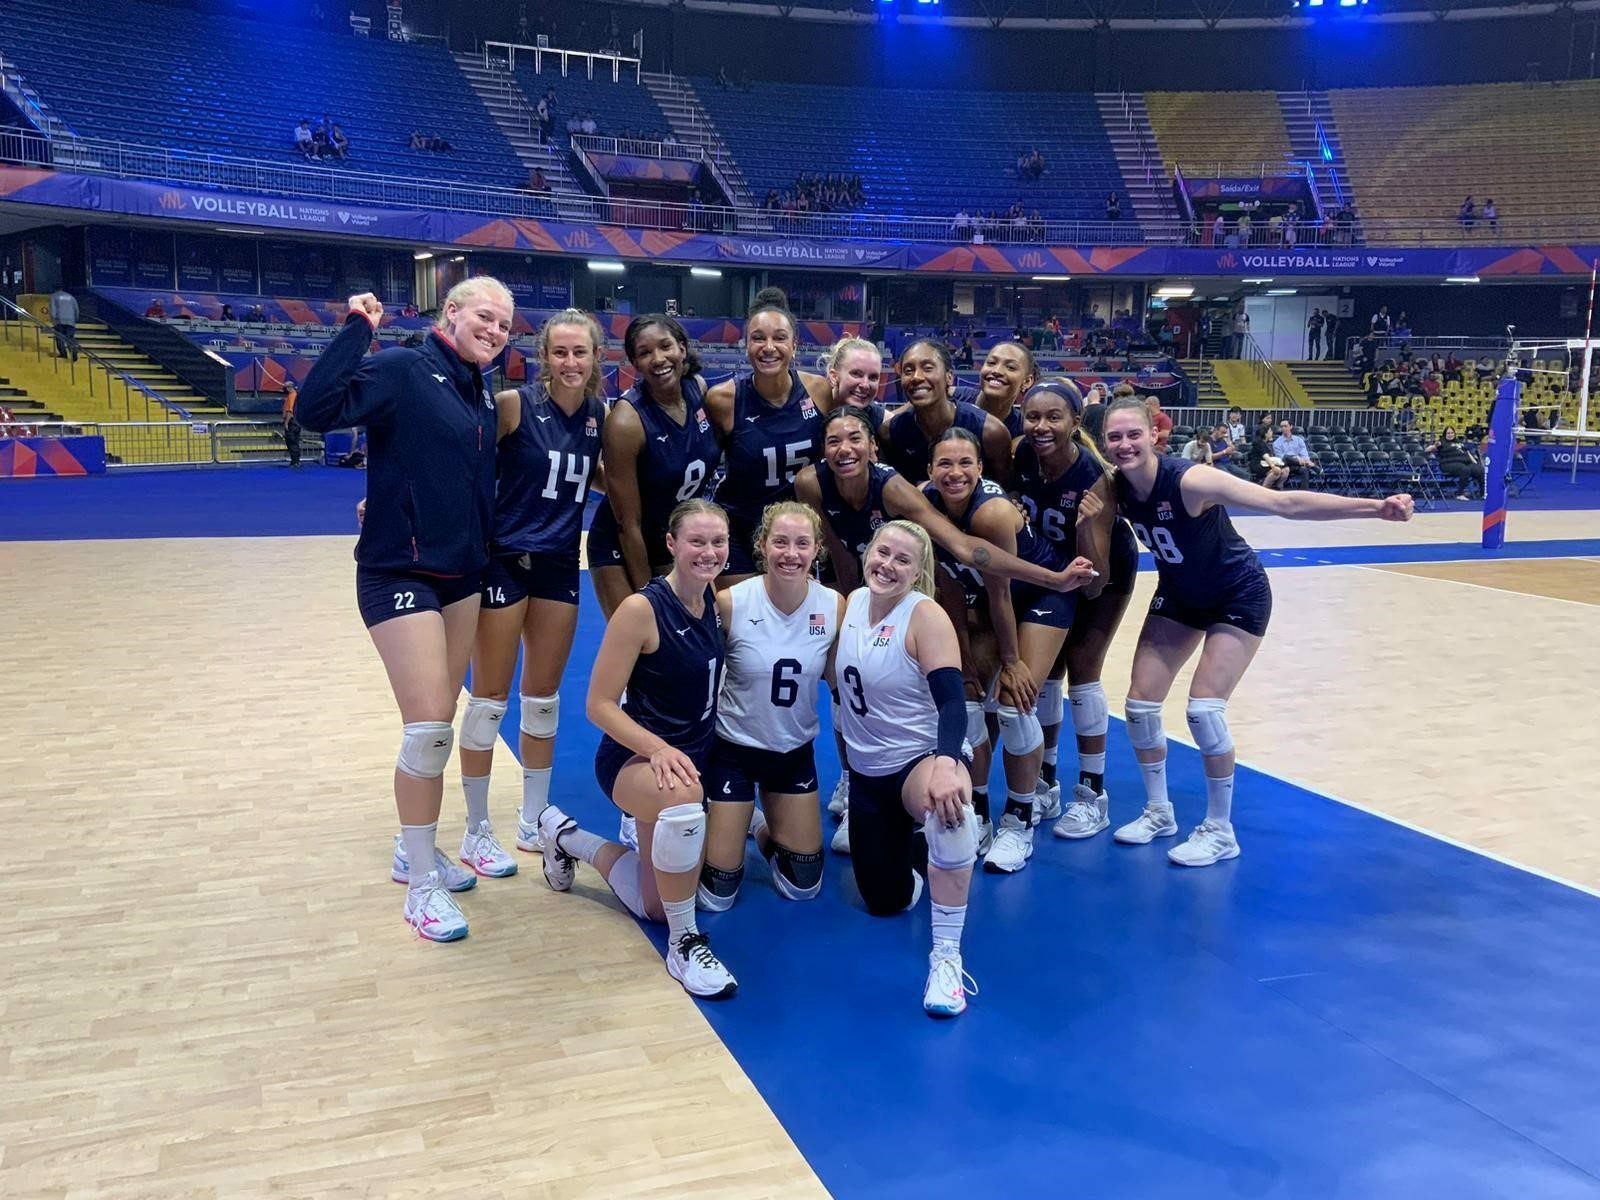 U.S Women's National Team after defeating Croatia in VNL.